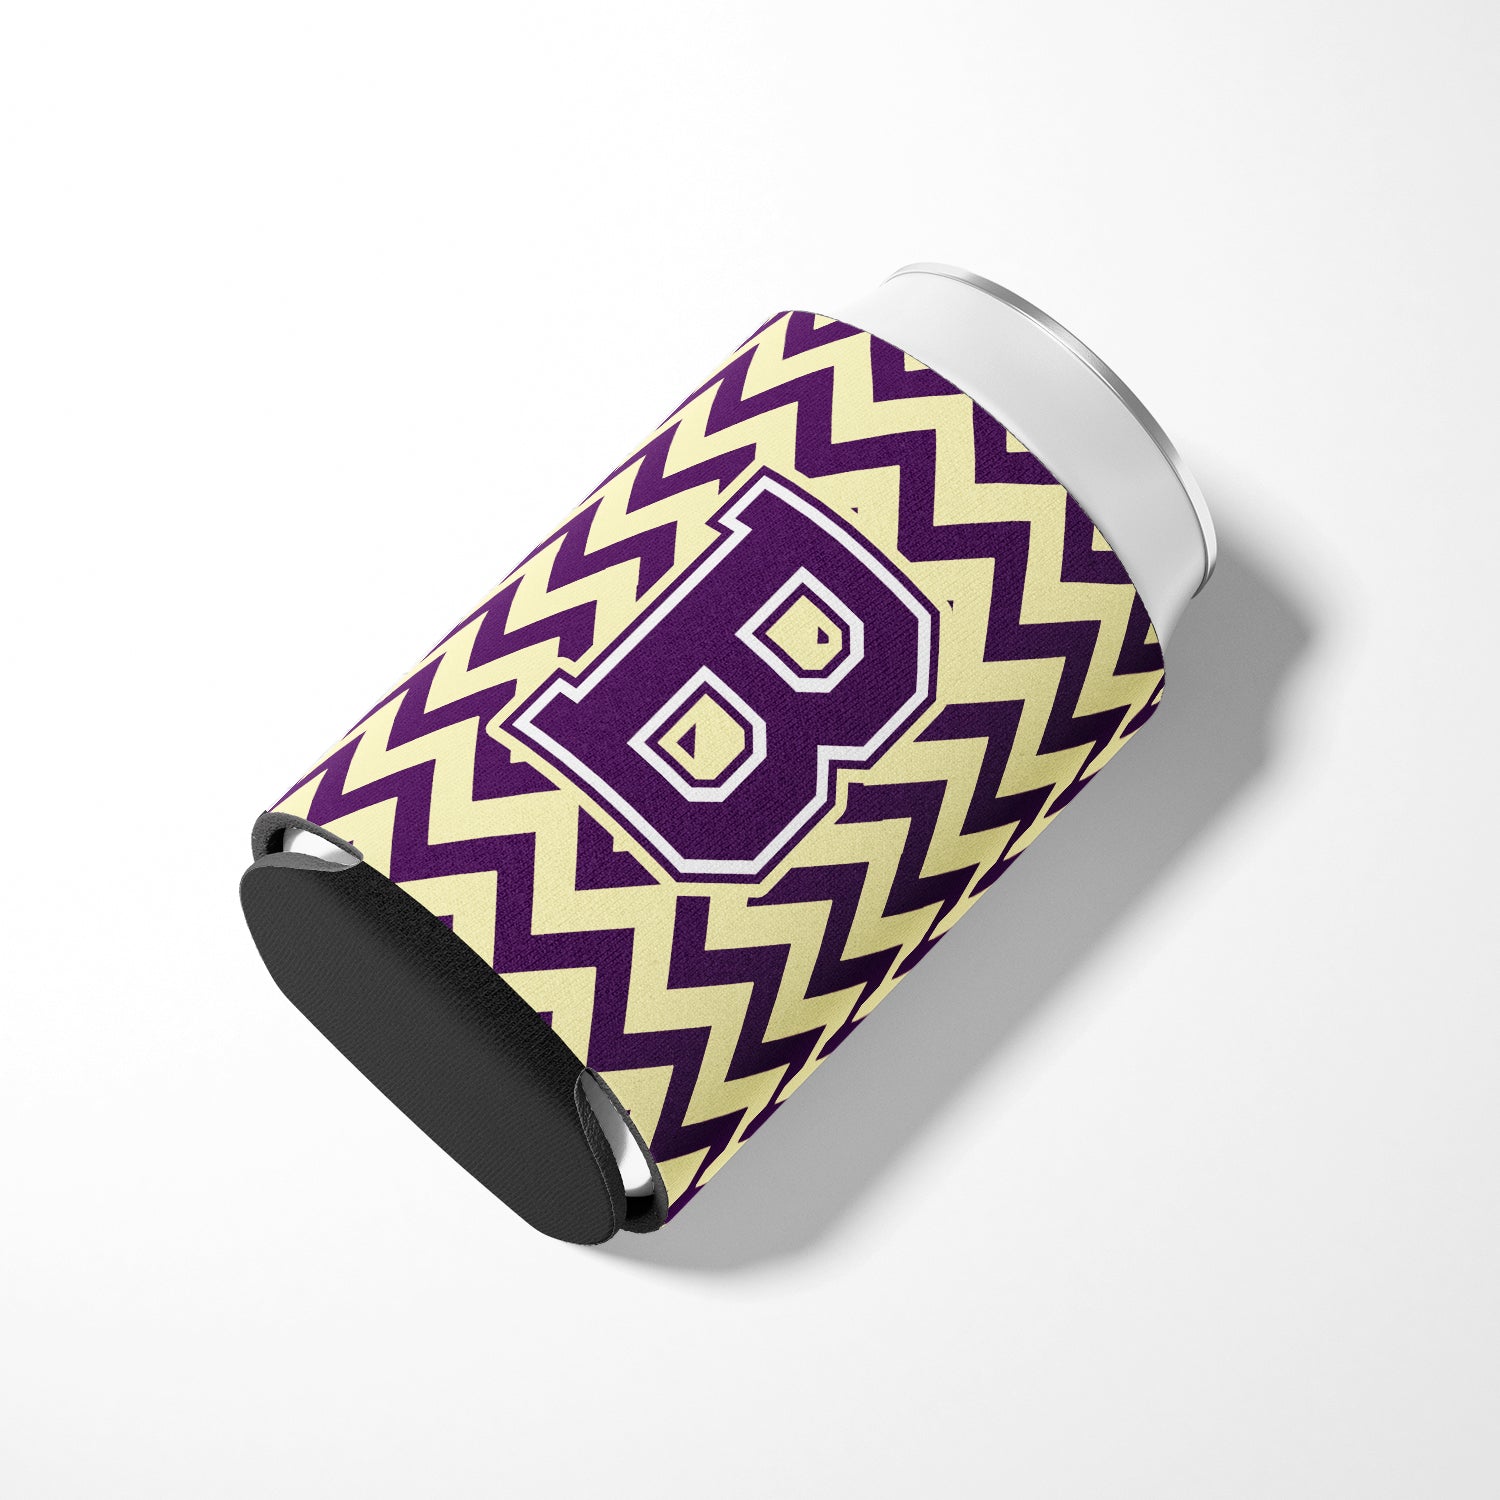 Letter B Chevron Purple and Gold Can or Bottle Hugger CJ1058-BCC.